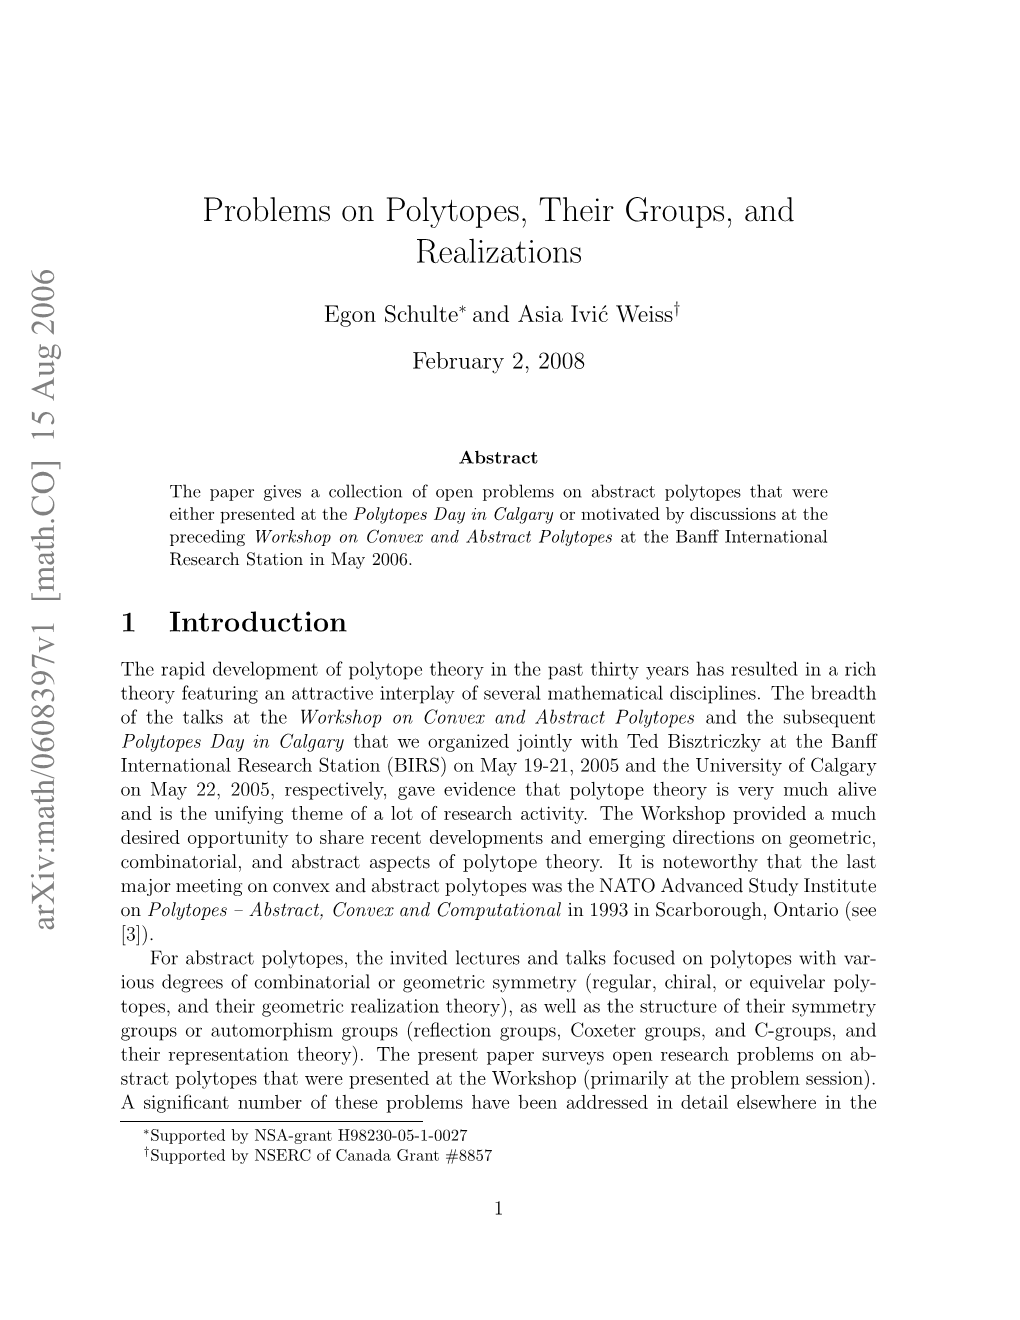 Problems on Polytopes, Their Groups, and Realizations